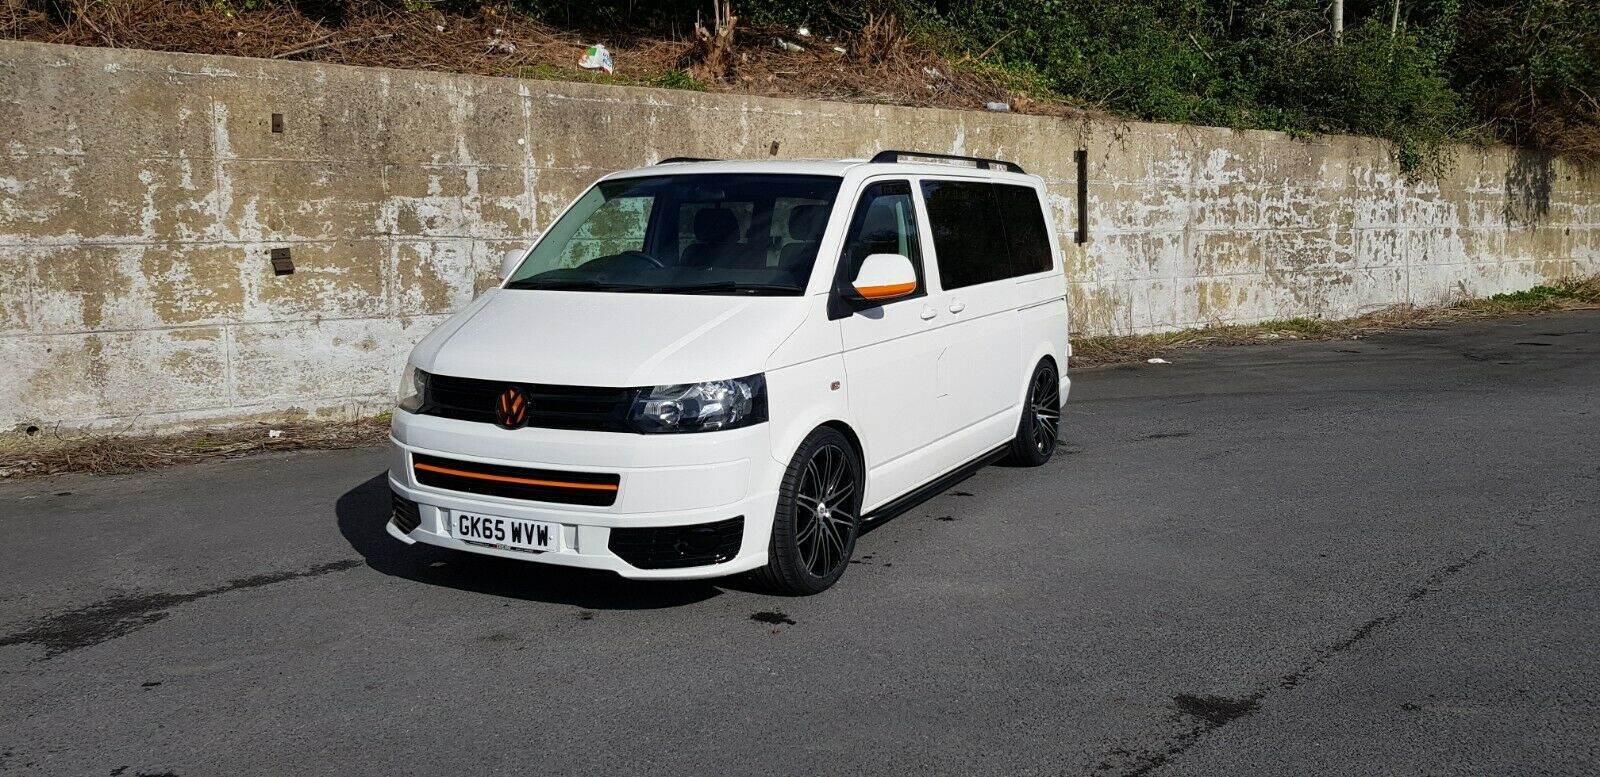 used vw transporter south wales